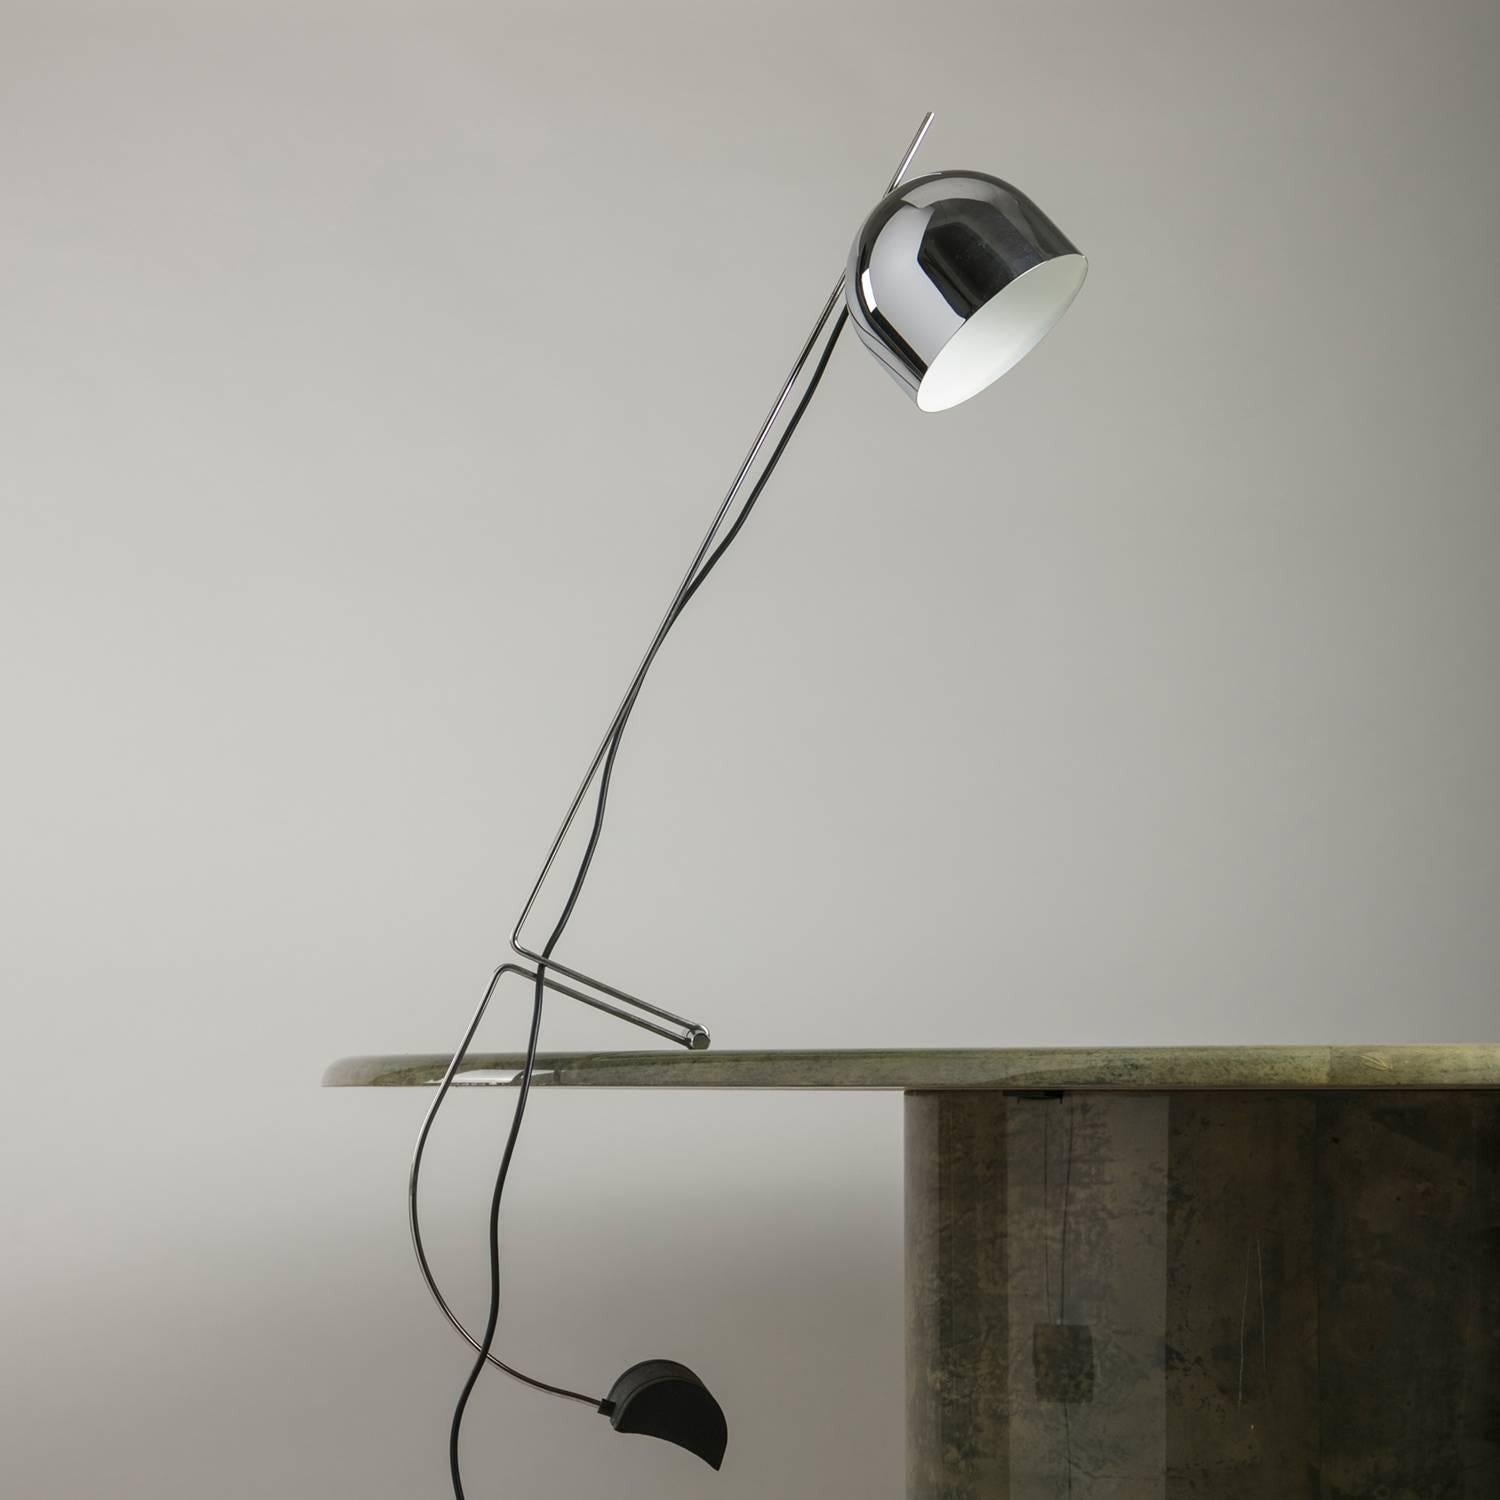 Cantilevered Italian 1970s table lamp.
Thin metal frame tube with adjustable shade and heavy counterweight.
This piece is a later homage to Libralux lamp designed by Roberto Menghi.